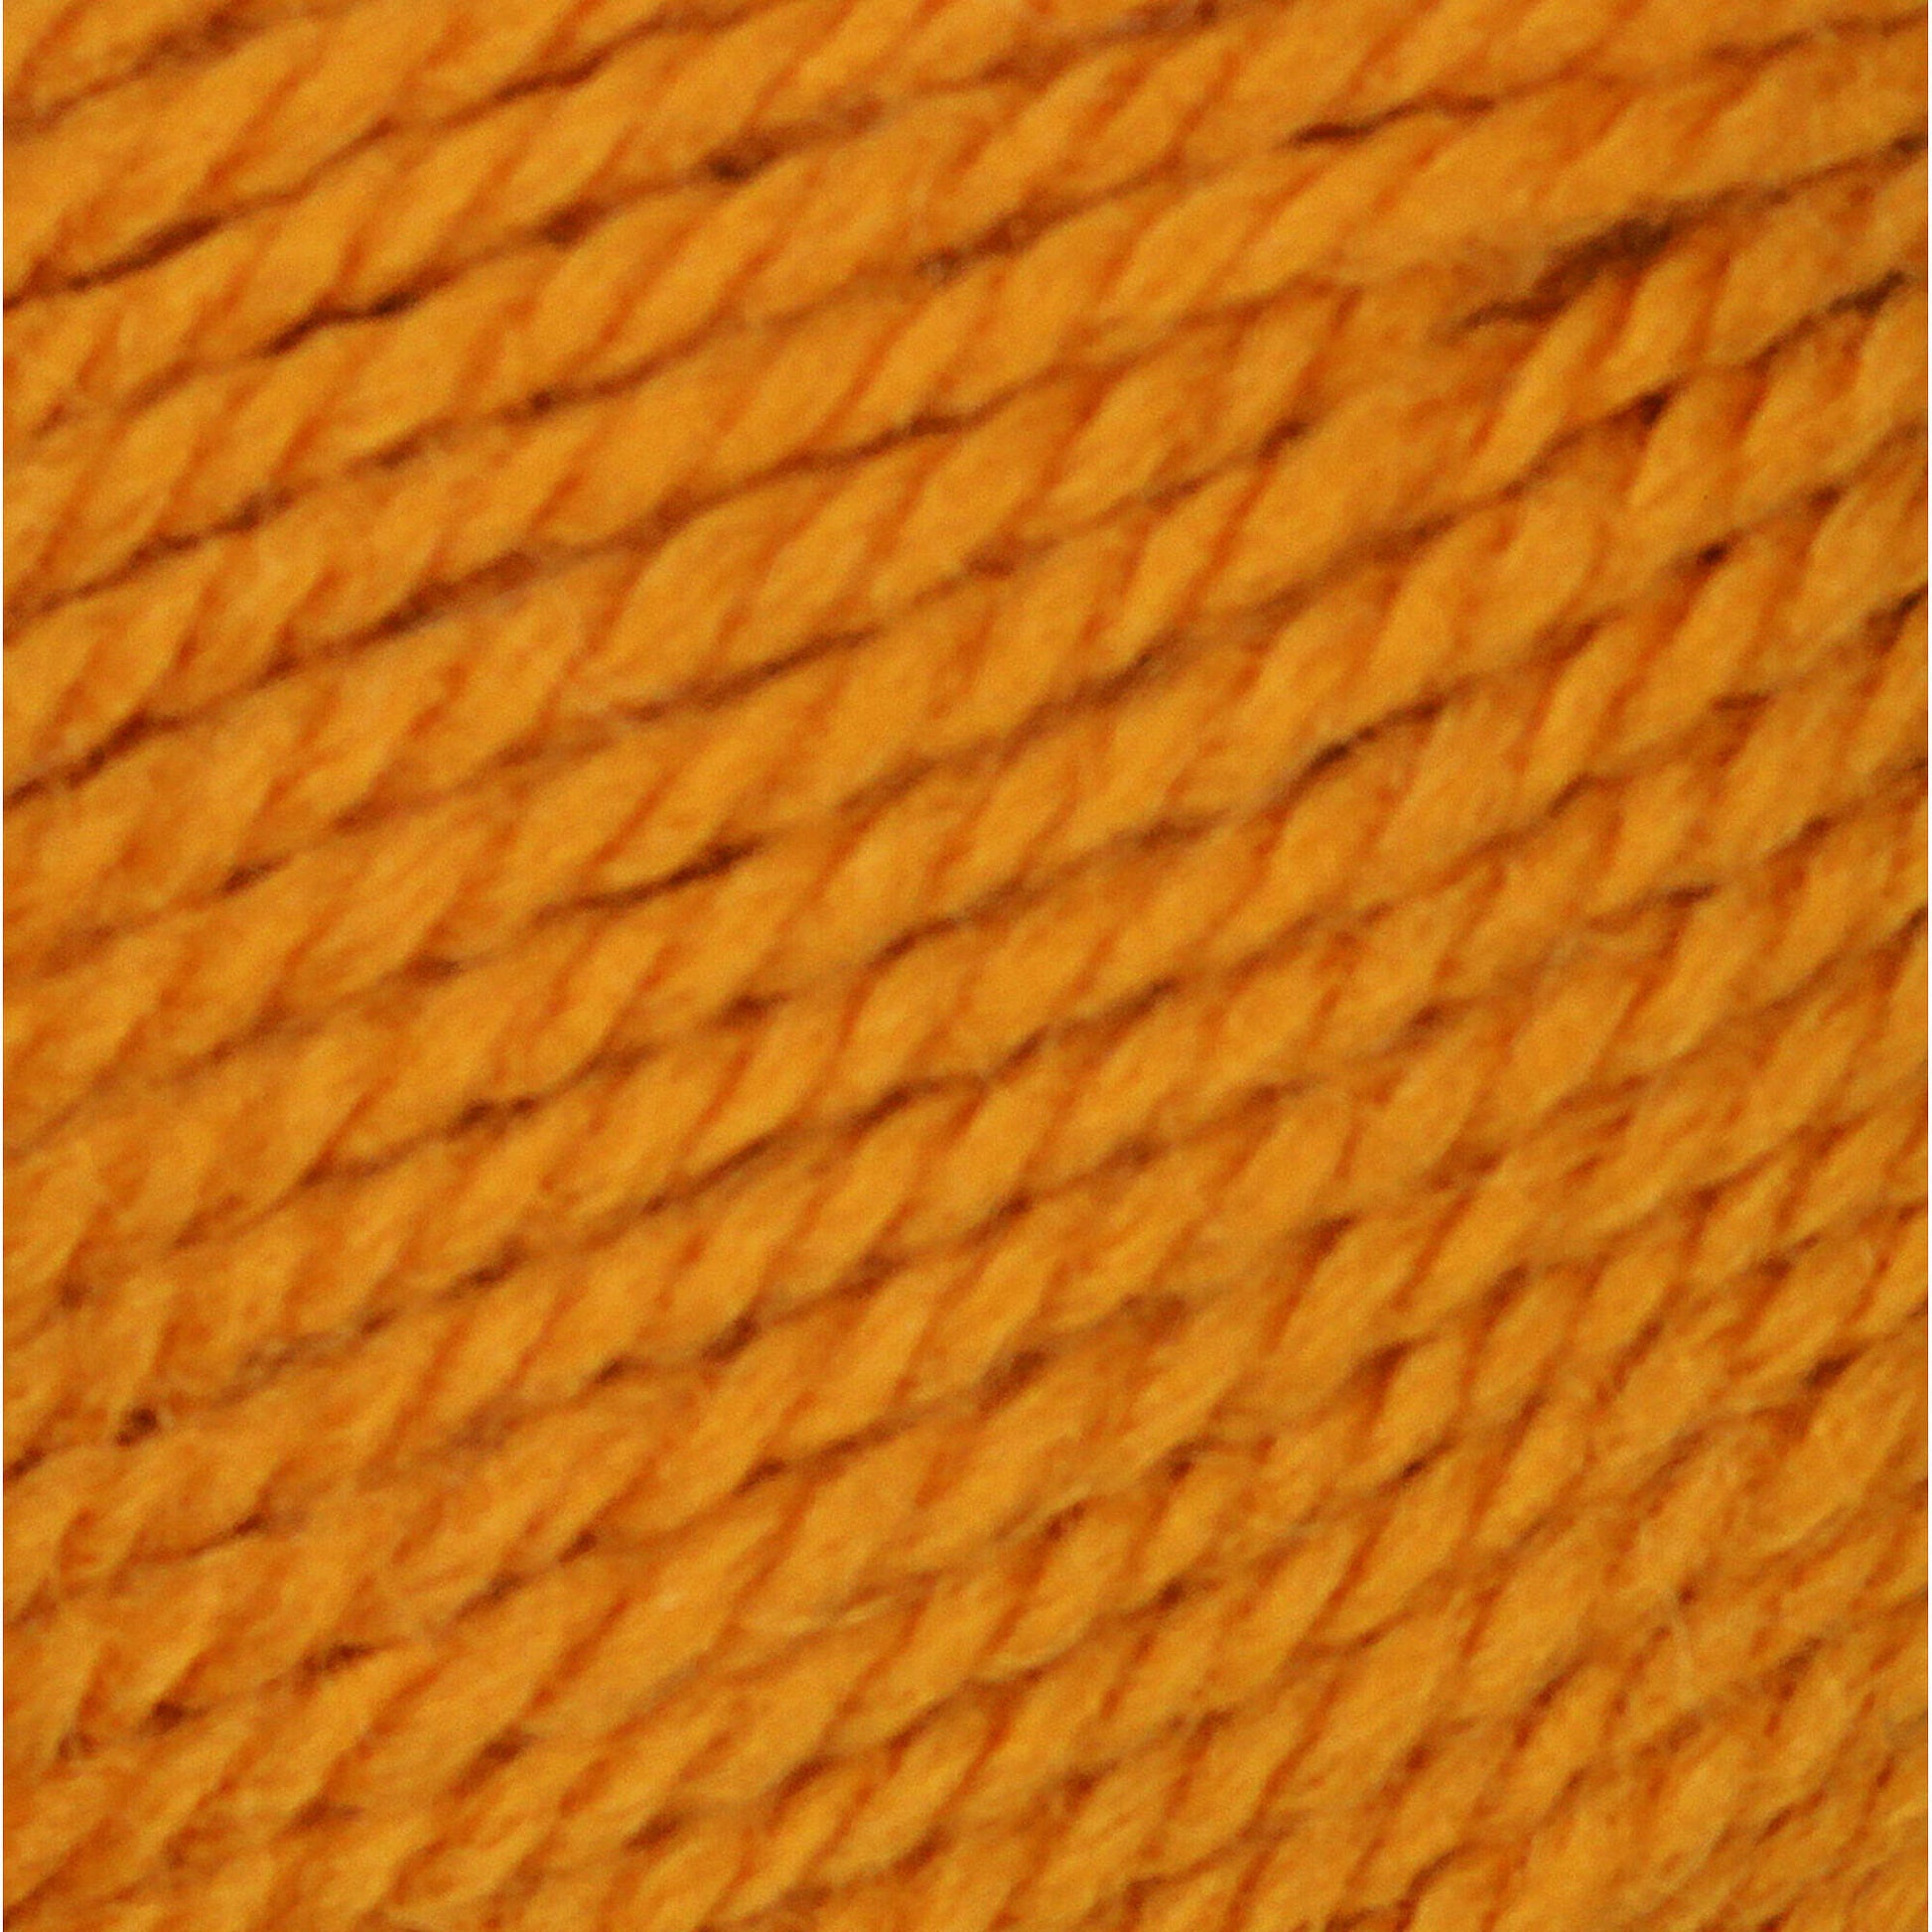 Patons Classic Wool Worsted Yarn - Discontinued Shades Yellow